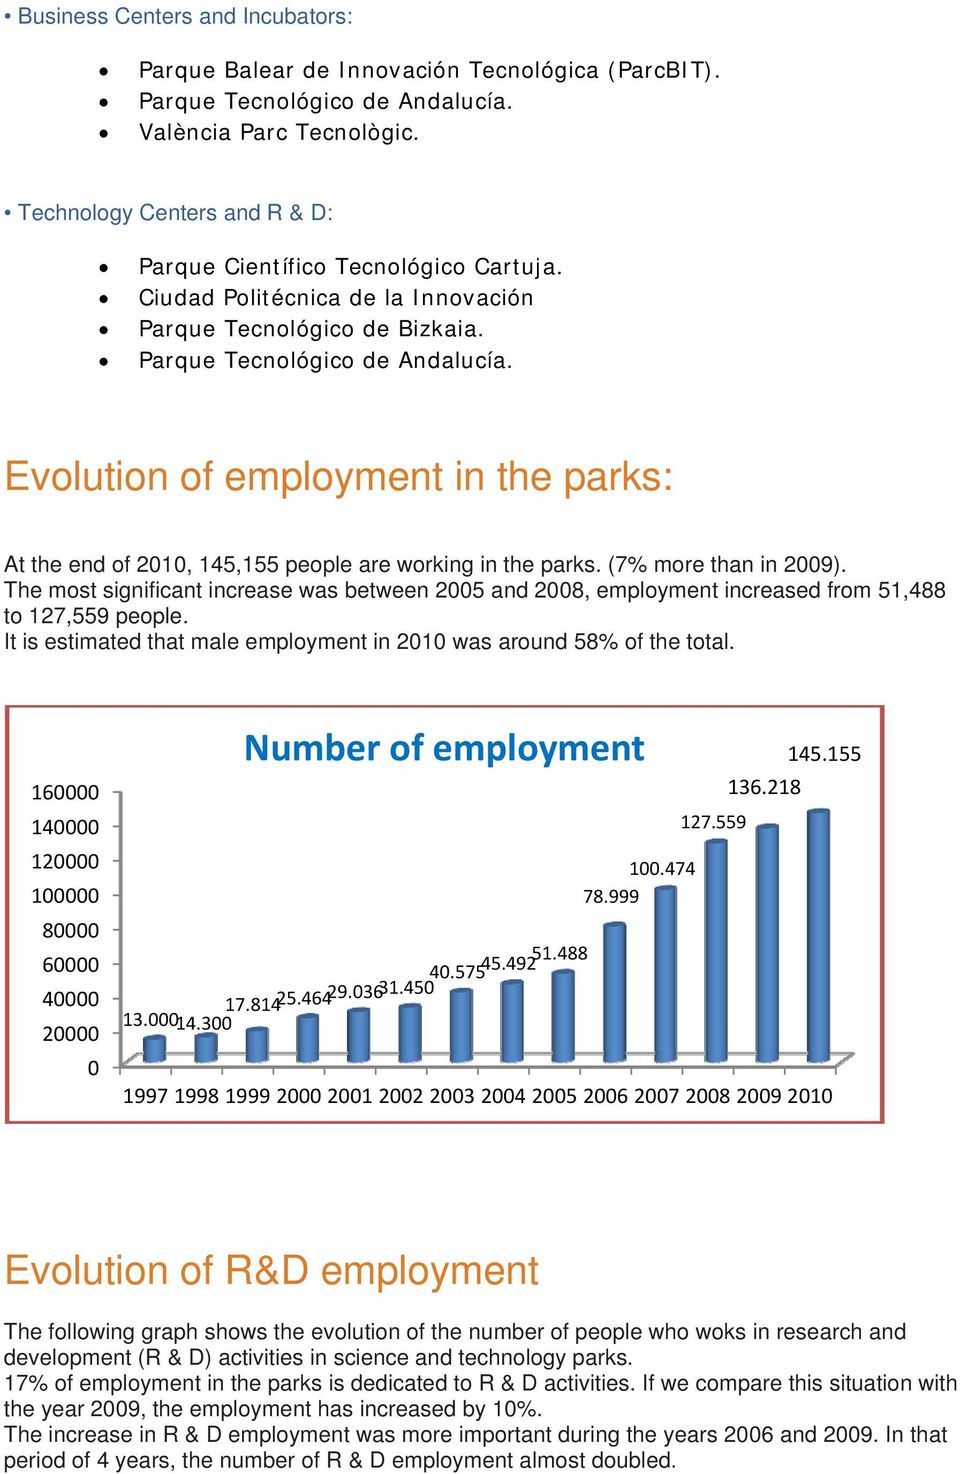 2% Evolution of employment in the parks: At the end of 2010, 145,155 people are working in the parks. (7% more than in 2009).